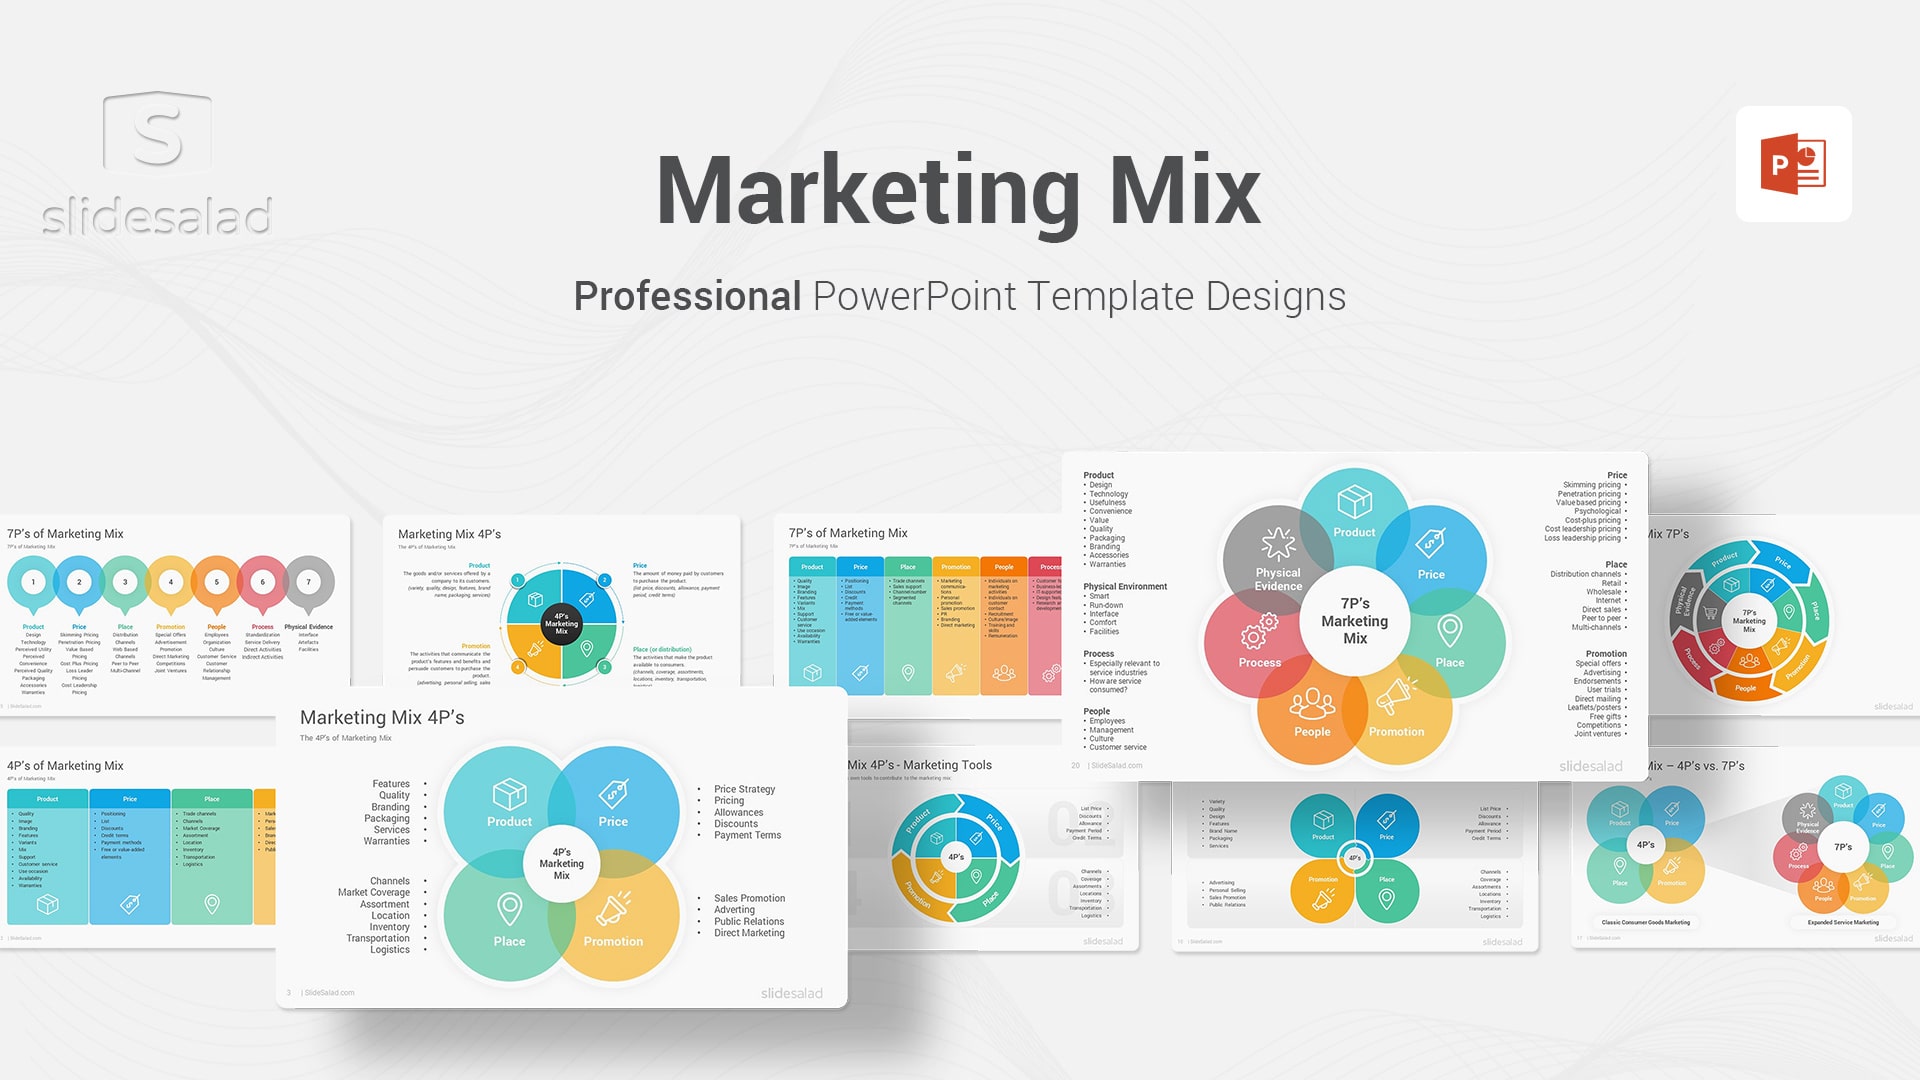 Marketing Mix Diagrams PowerPoint Presentation Template - Graphical Representation of Well-organized Concepts, Definition, and Diagrams of 4Ps